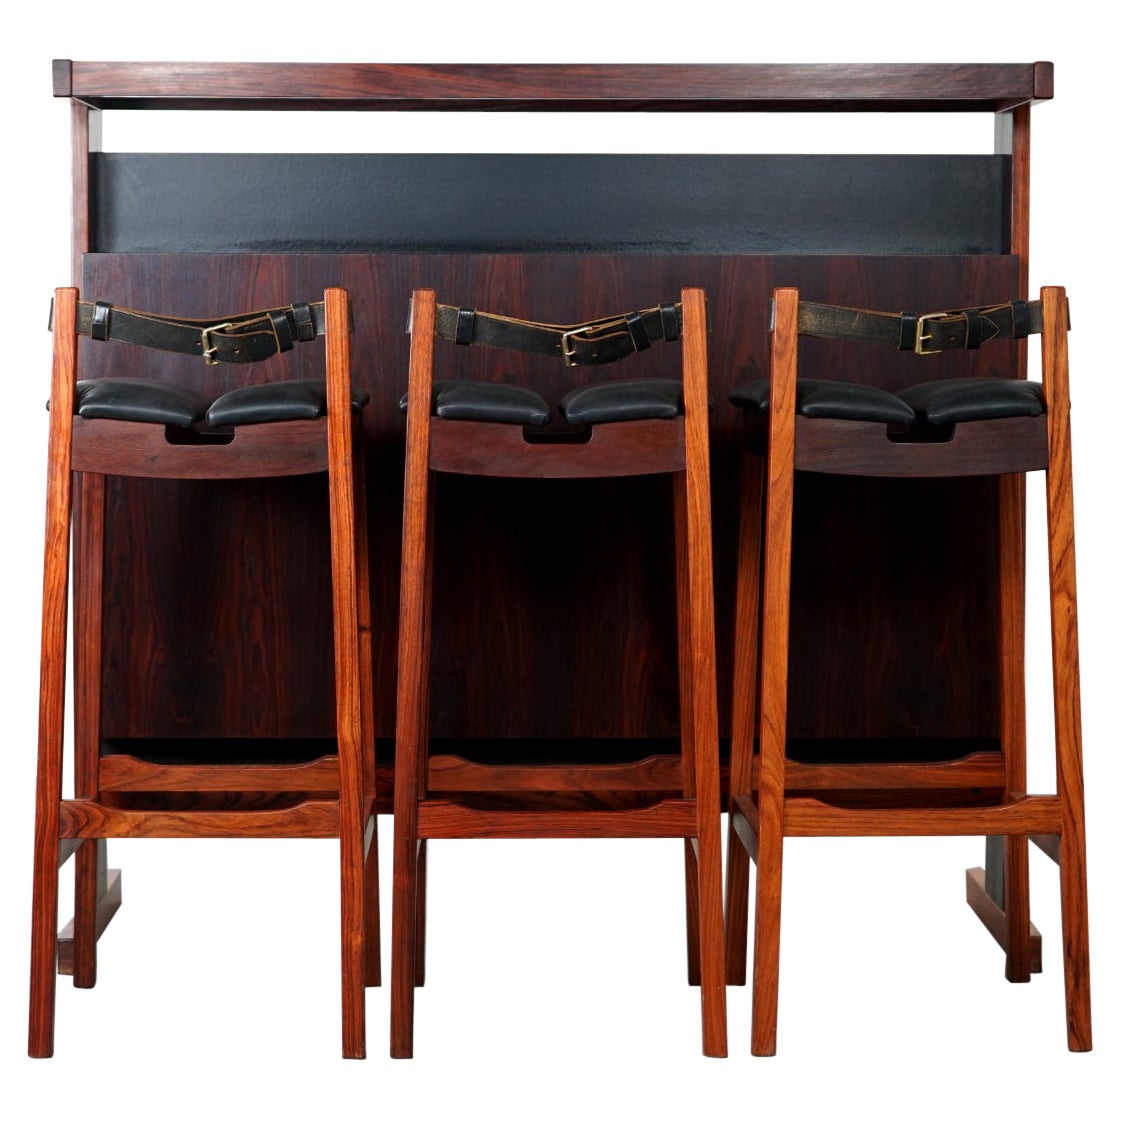 Danish Mid-Century Modern Rosewood Bar with Stools For Sale